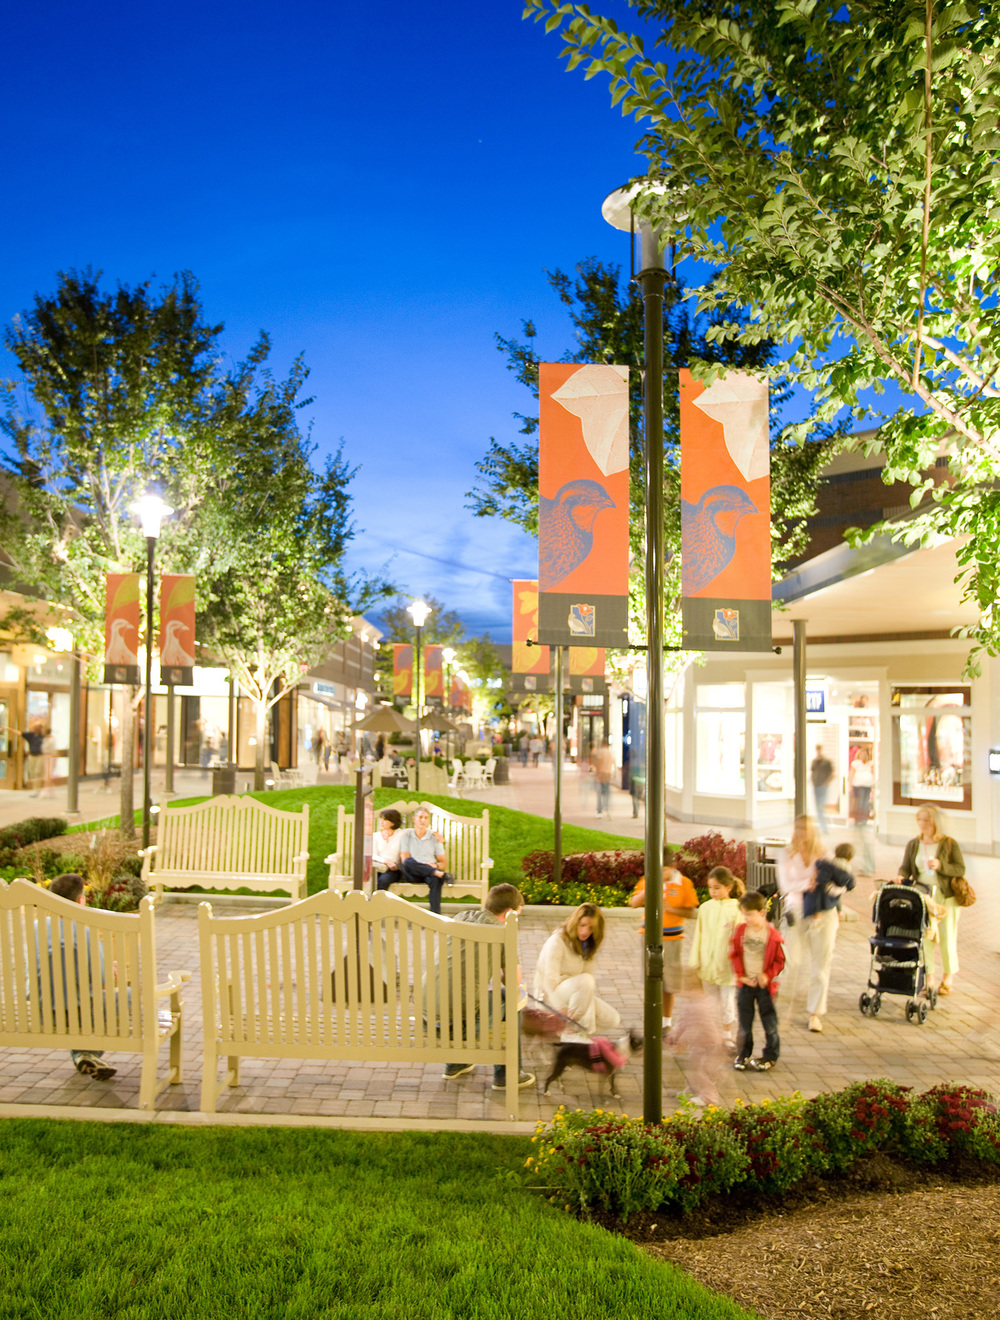 The Mall at Partridge Creek — Hobbs+Black Architects